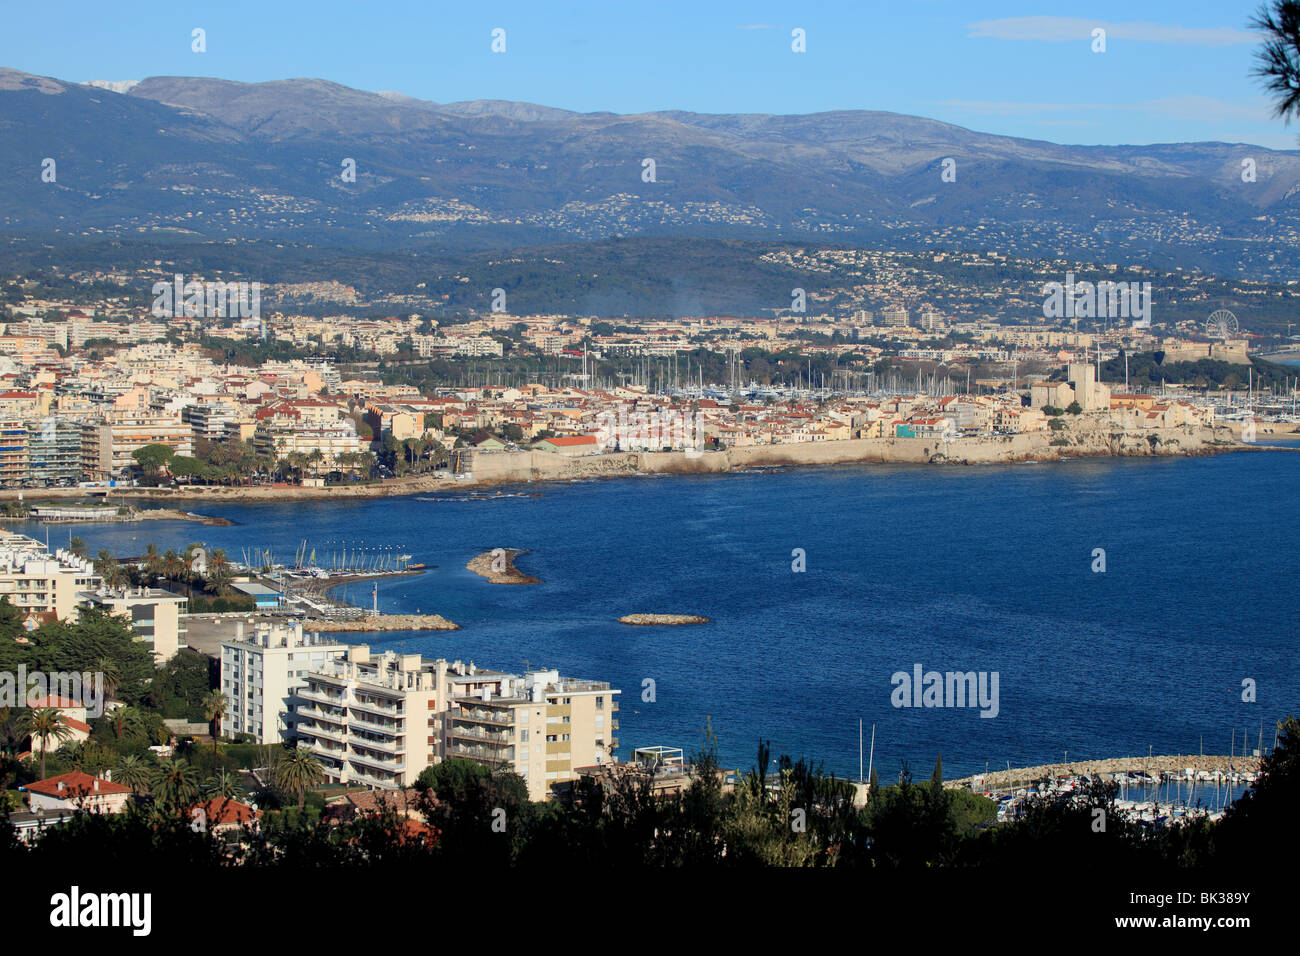 Overview of the city of Antibes and the bay. Stock Photo